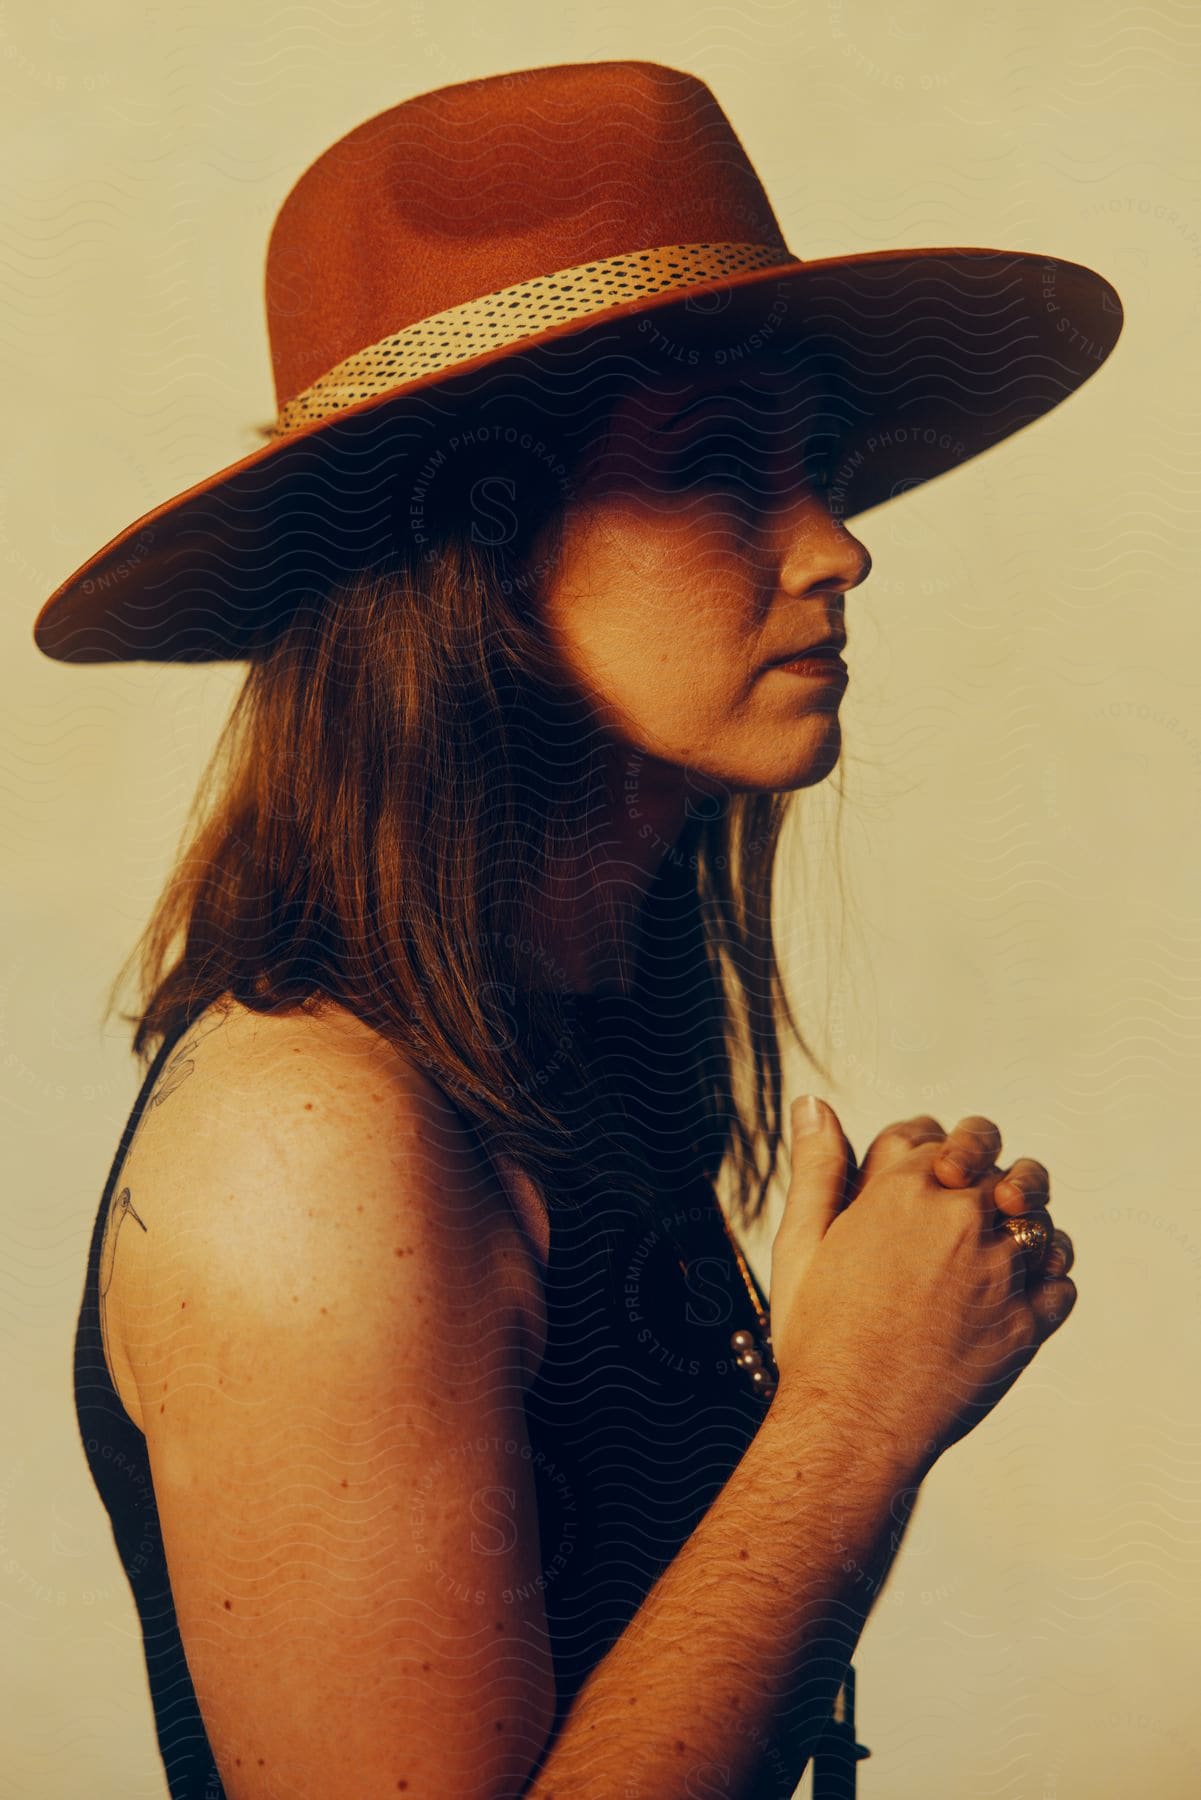 A woman wearing a wide hat poses for the camera